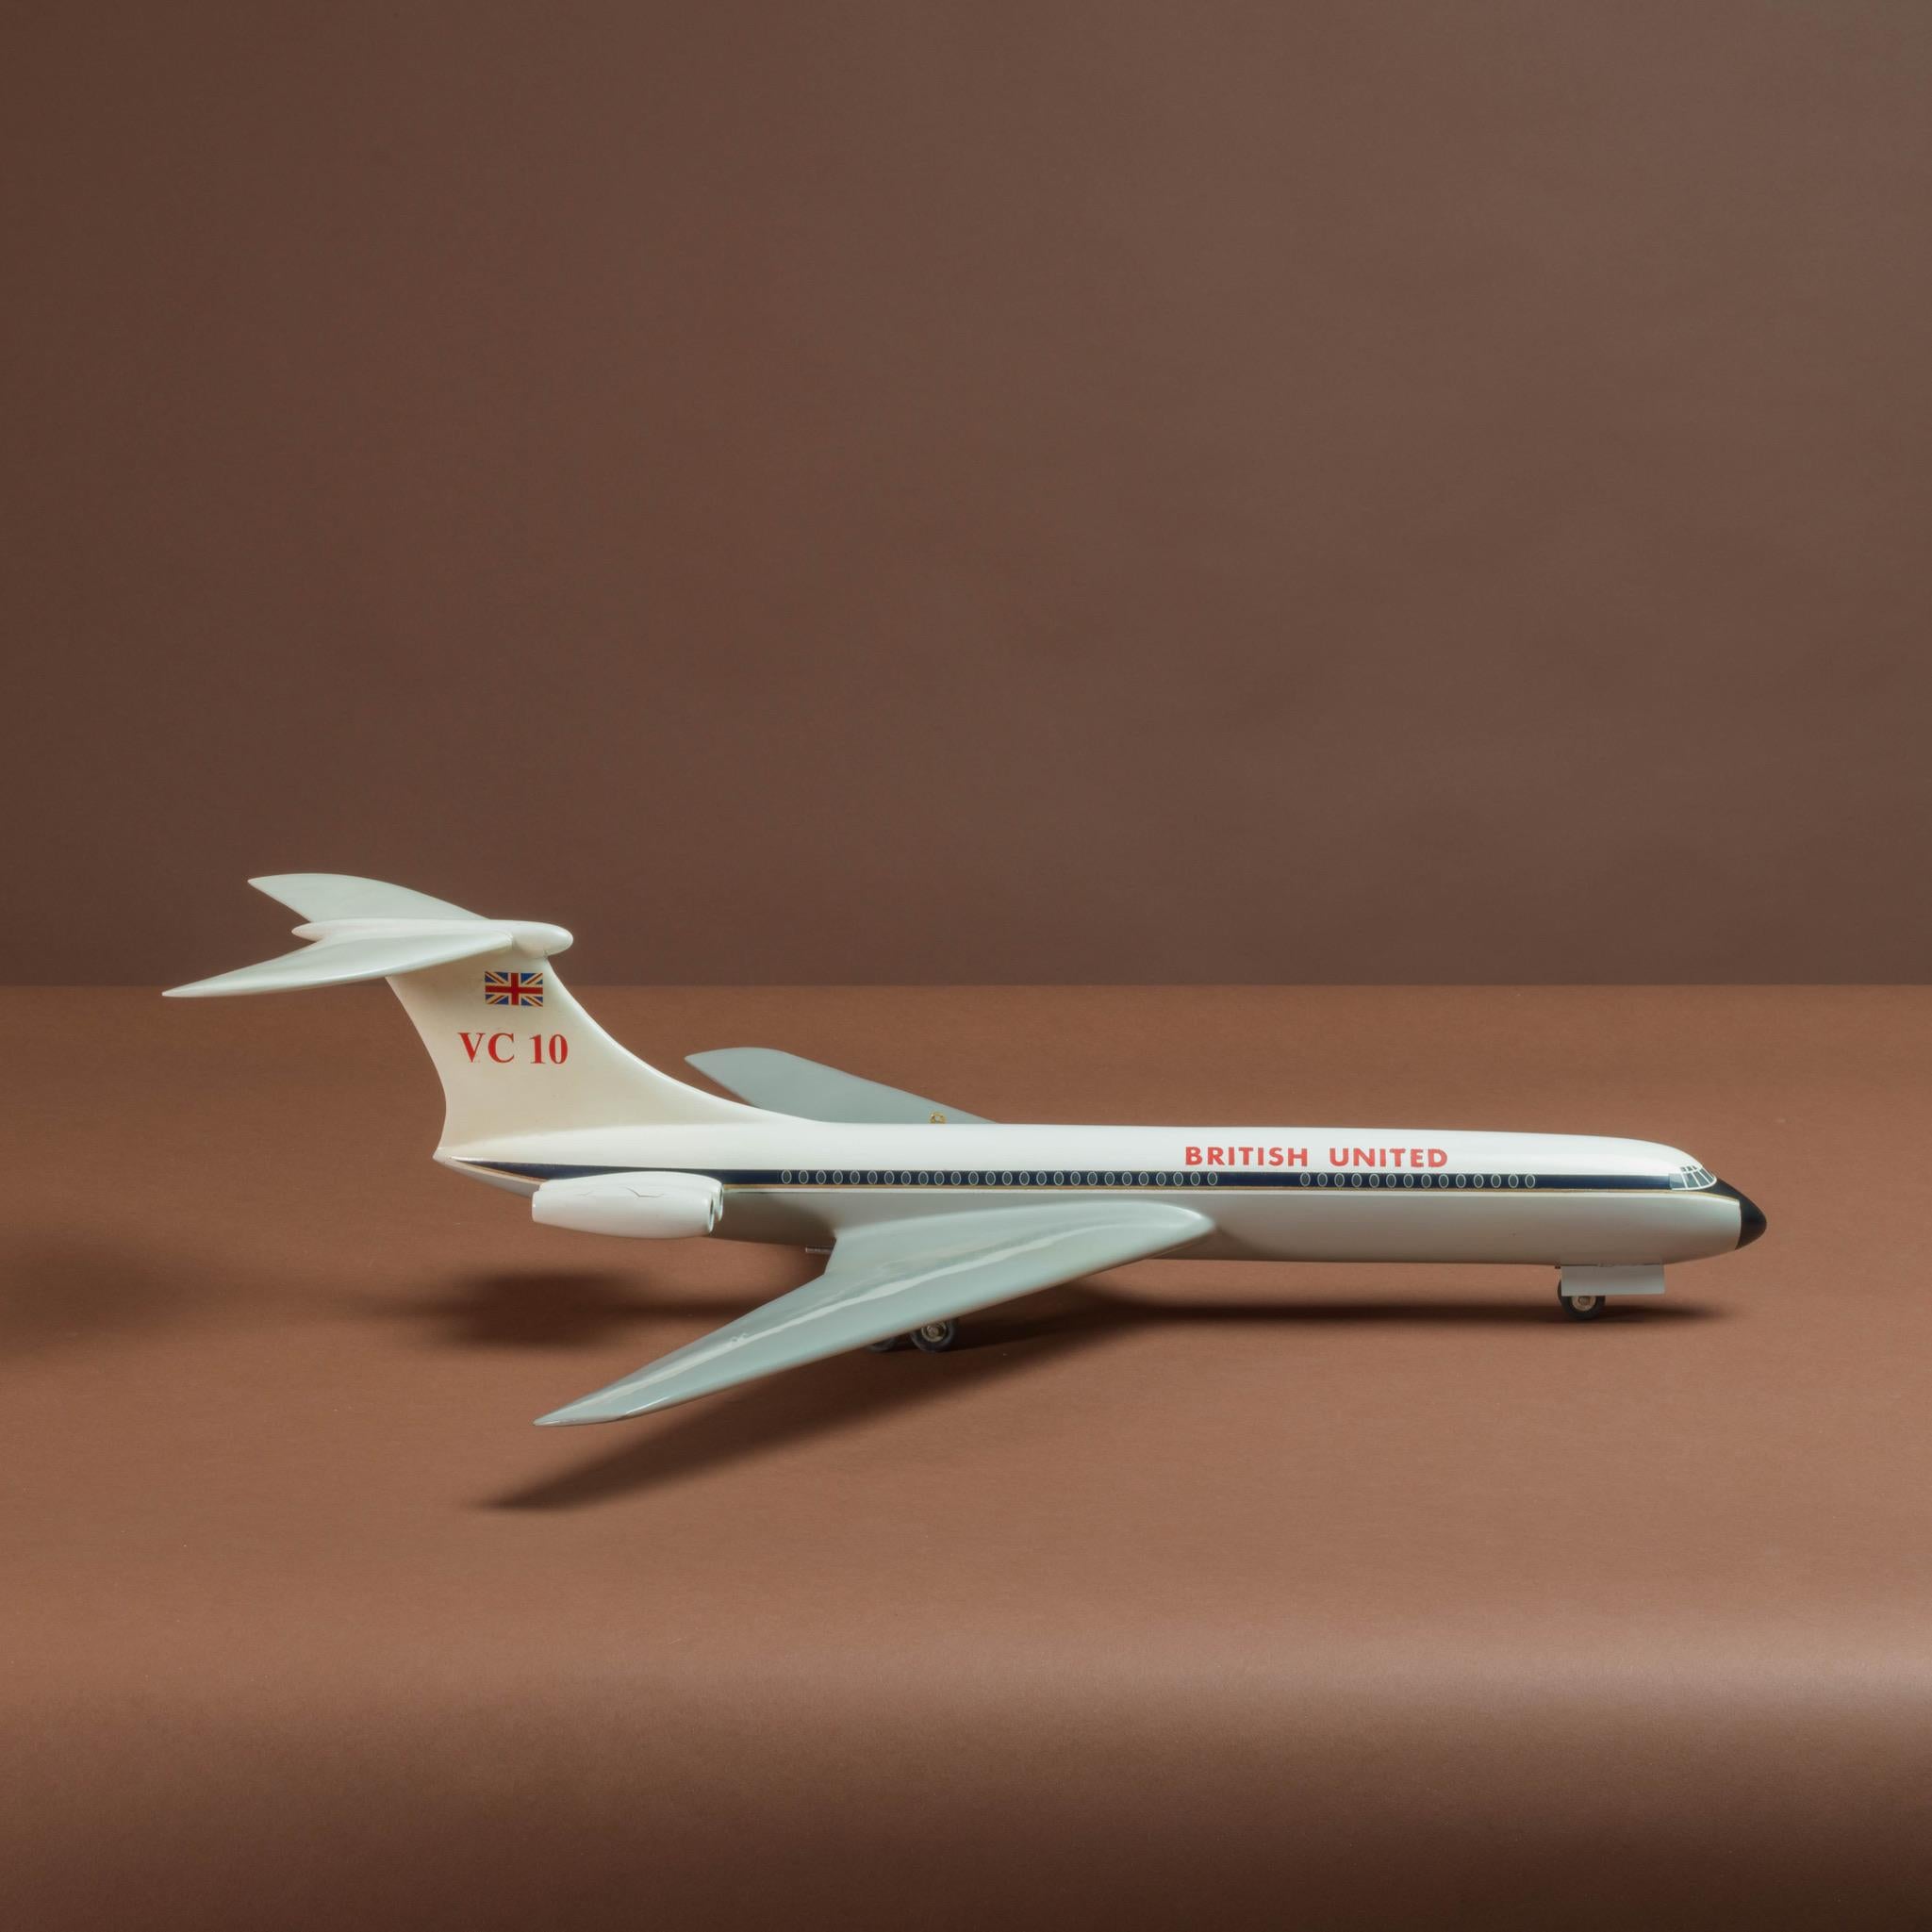 A rare 1960's scale model of a Vickers VC10 in British United Airways livery mounted on original stand and with original wooden case.

The Vickers VC10 was a long-range British airliner designed and built by Vickers-Armstrongs, and first flown in